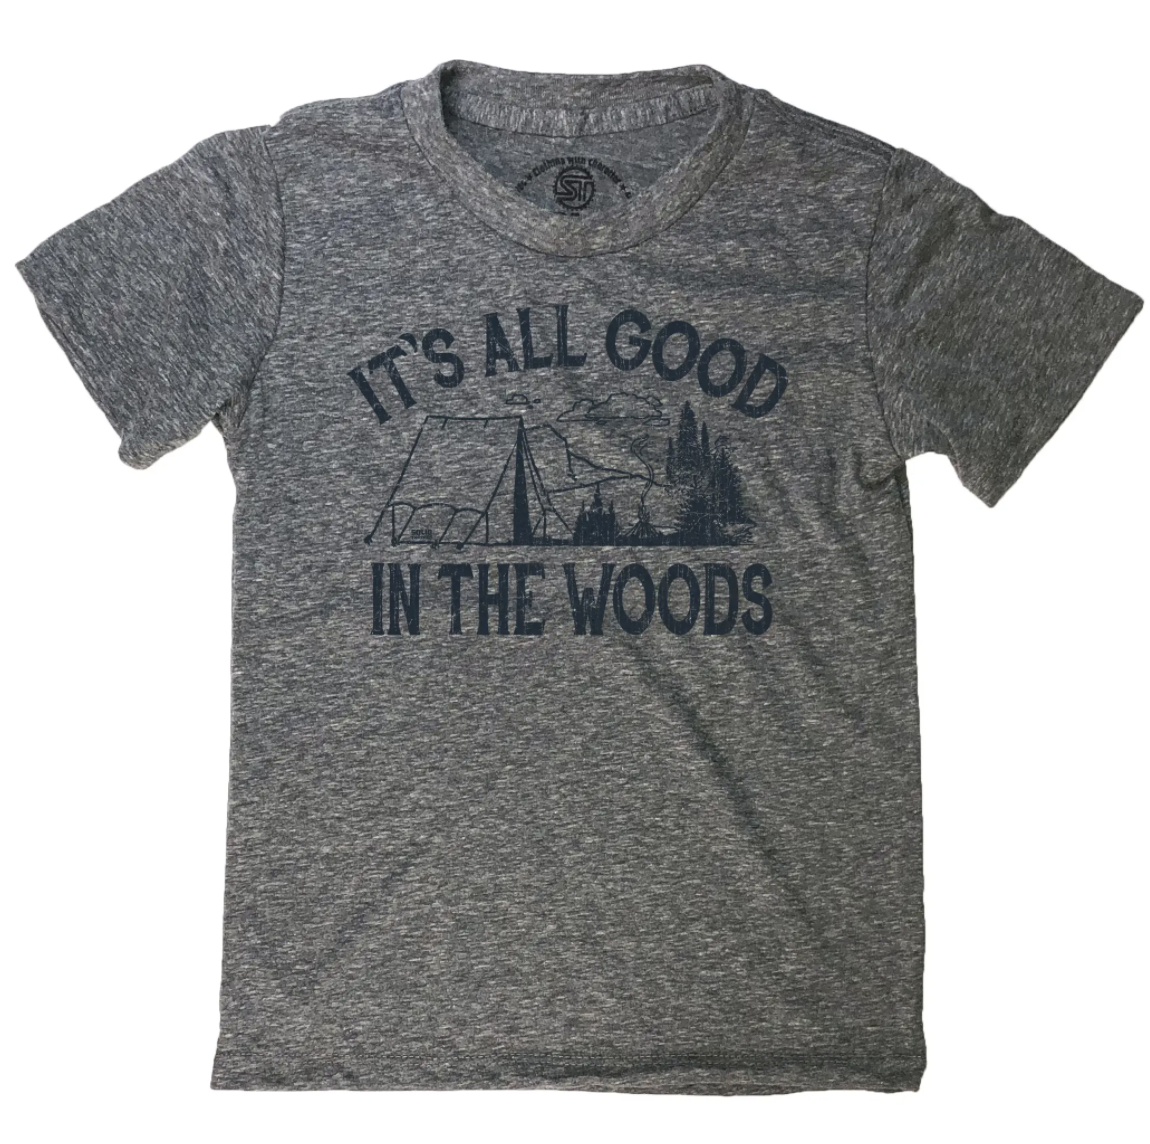 It's All Good In The Woods Kid's Cotton T-Shirt